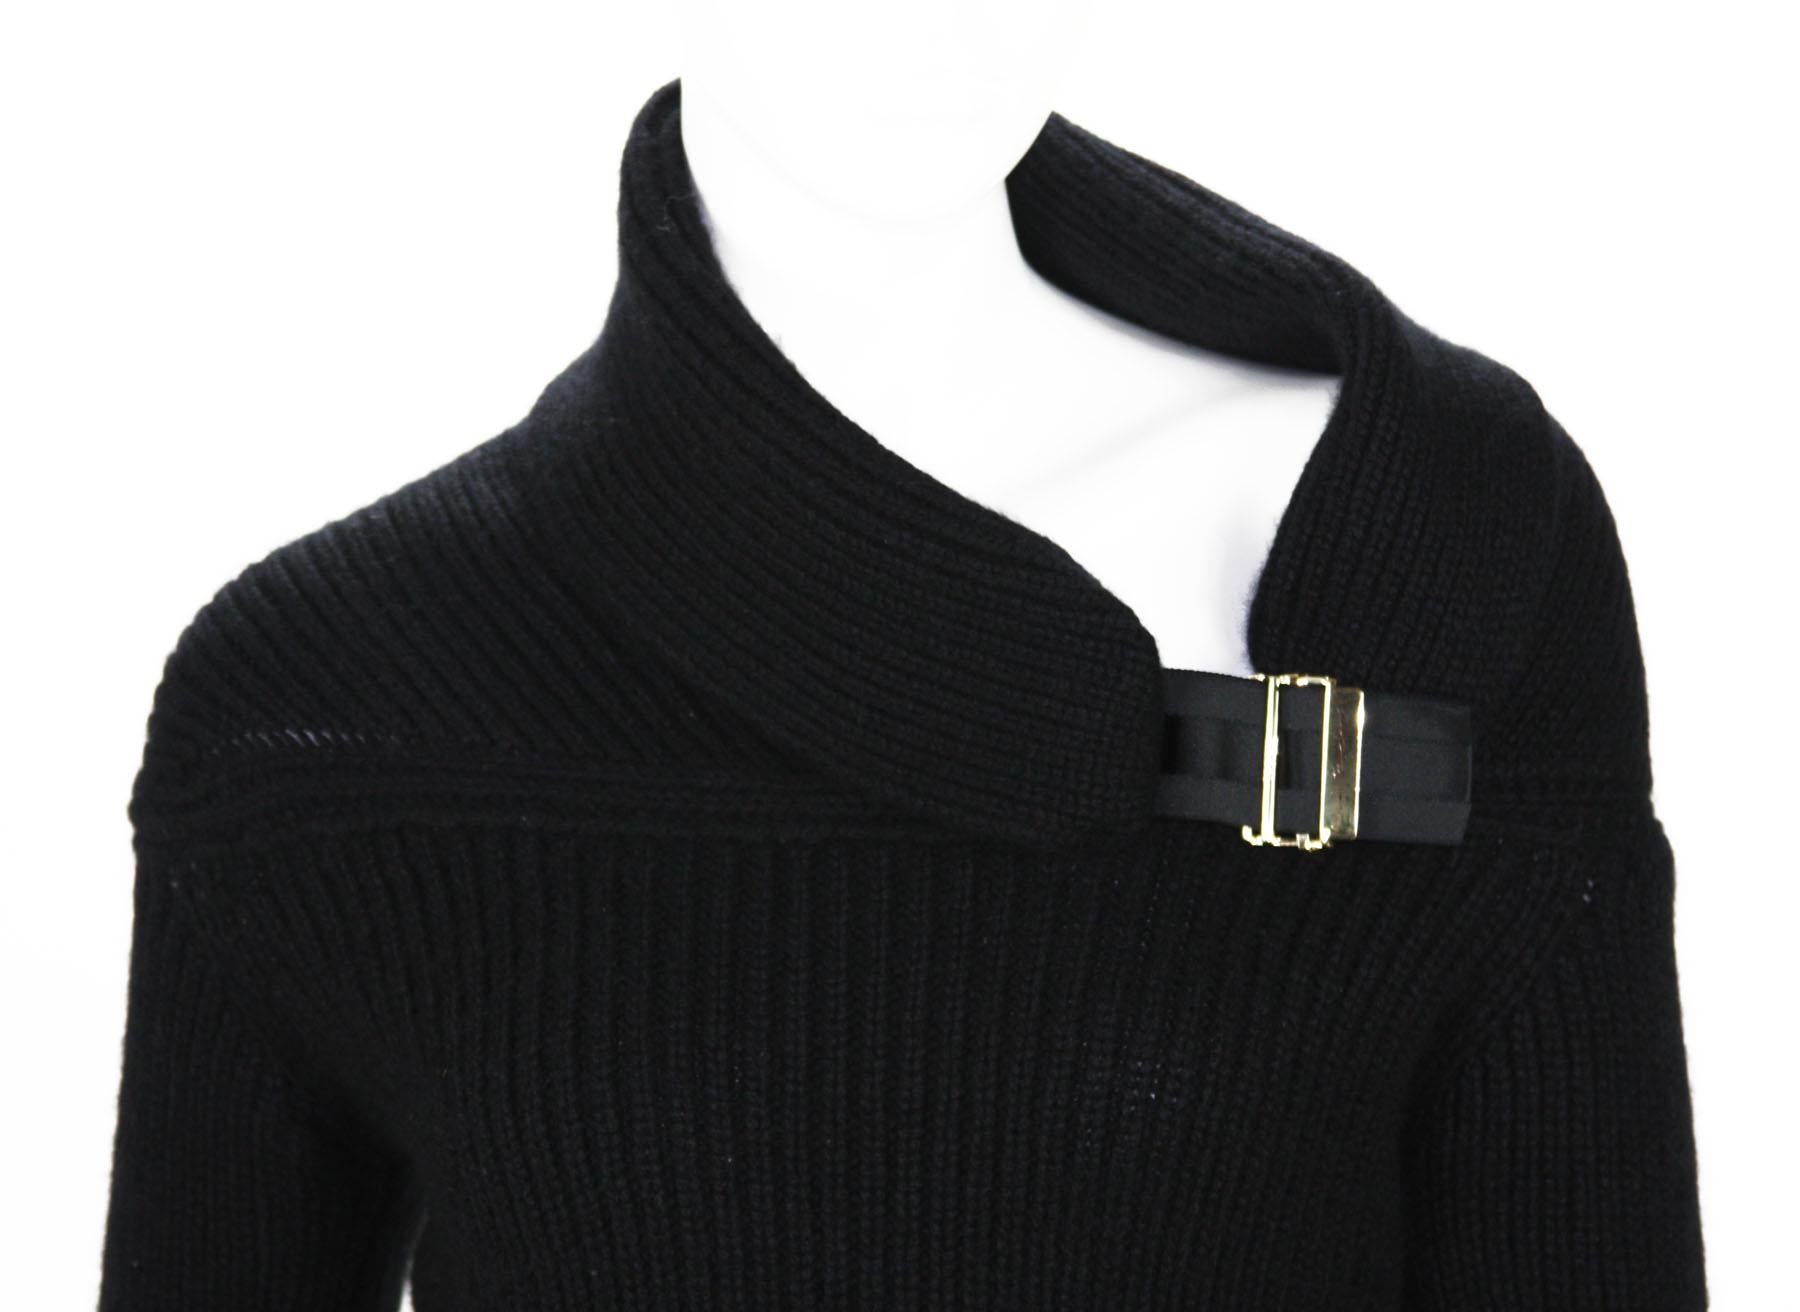 Tom Ford for Gucci F/W 2003 Collection 100% Cashmere Sweater size Small In Excellent Condition For Sale In Montgomery, TX